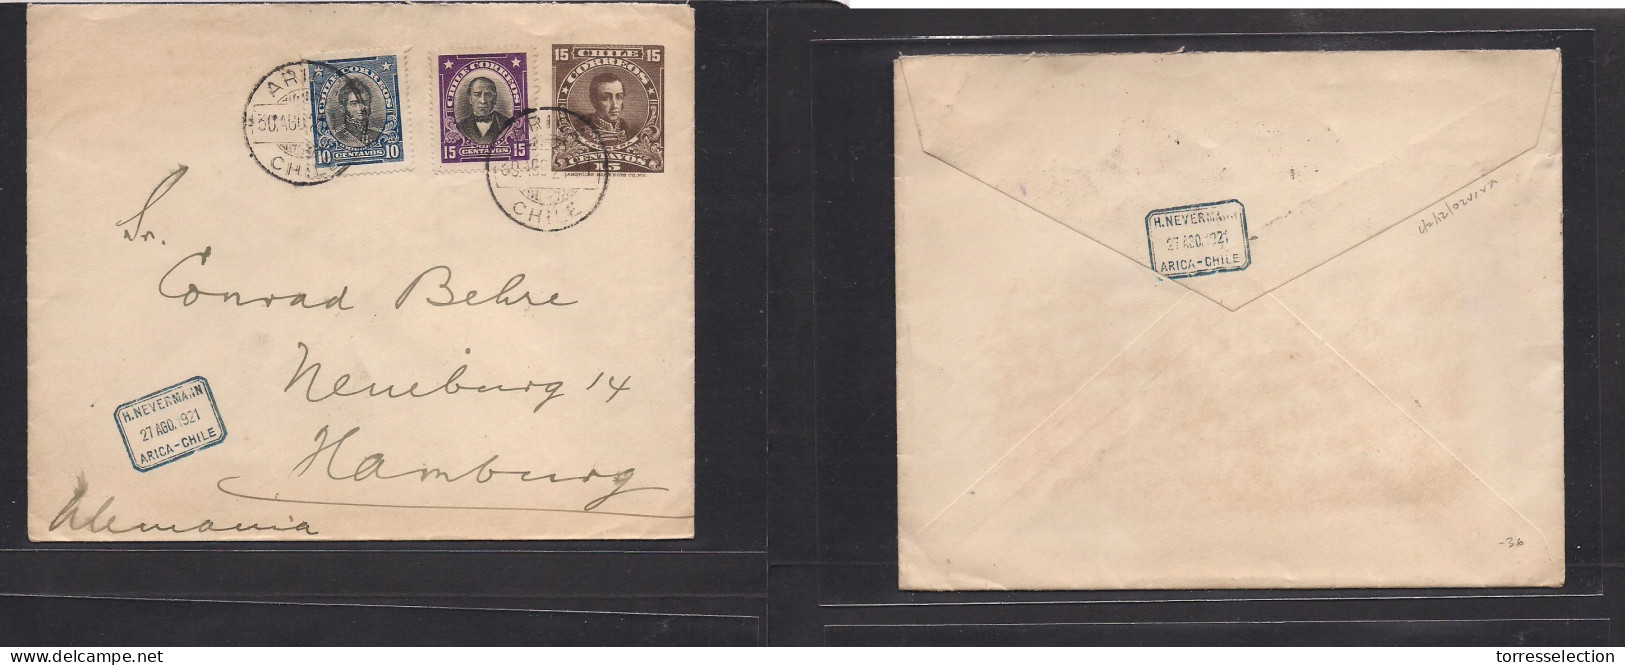 CHILE - Stationery. 1921 (30 Aug) Arica - Germany. 15c Brown + Adtls Stat Env. VF. - Chile